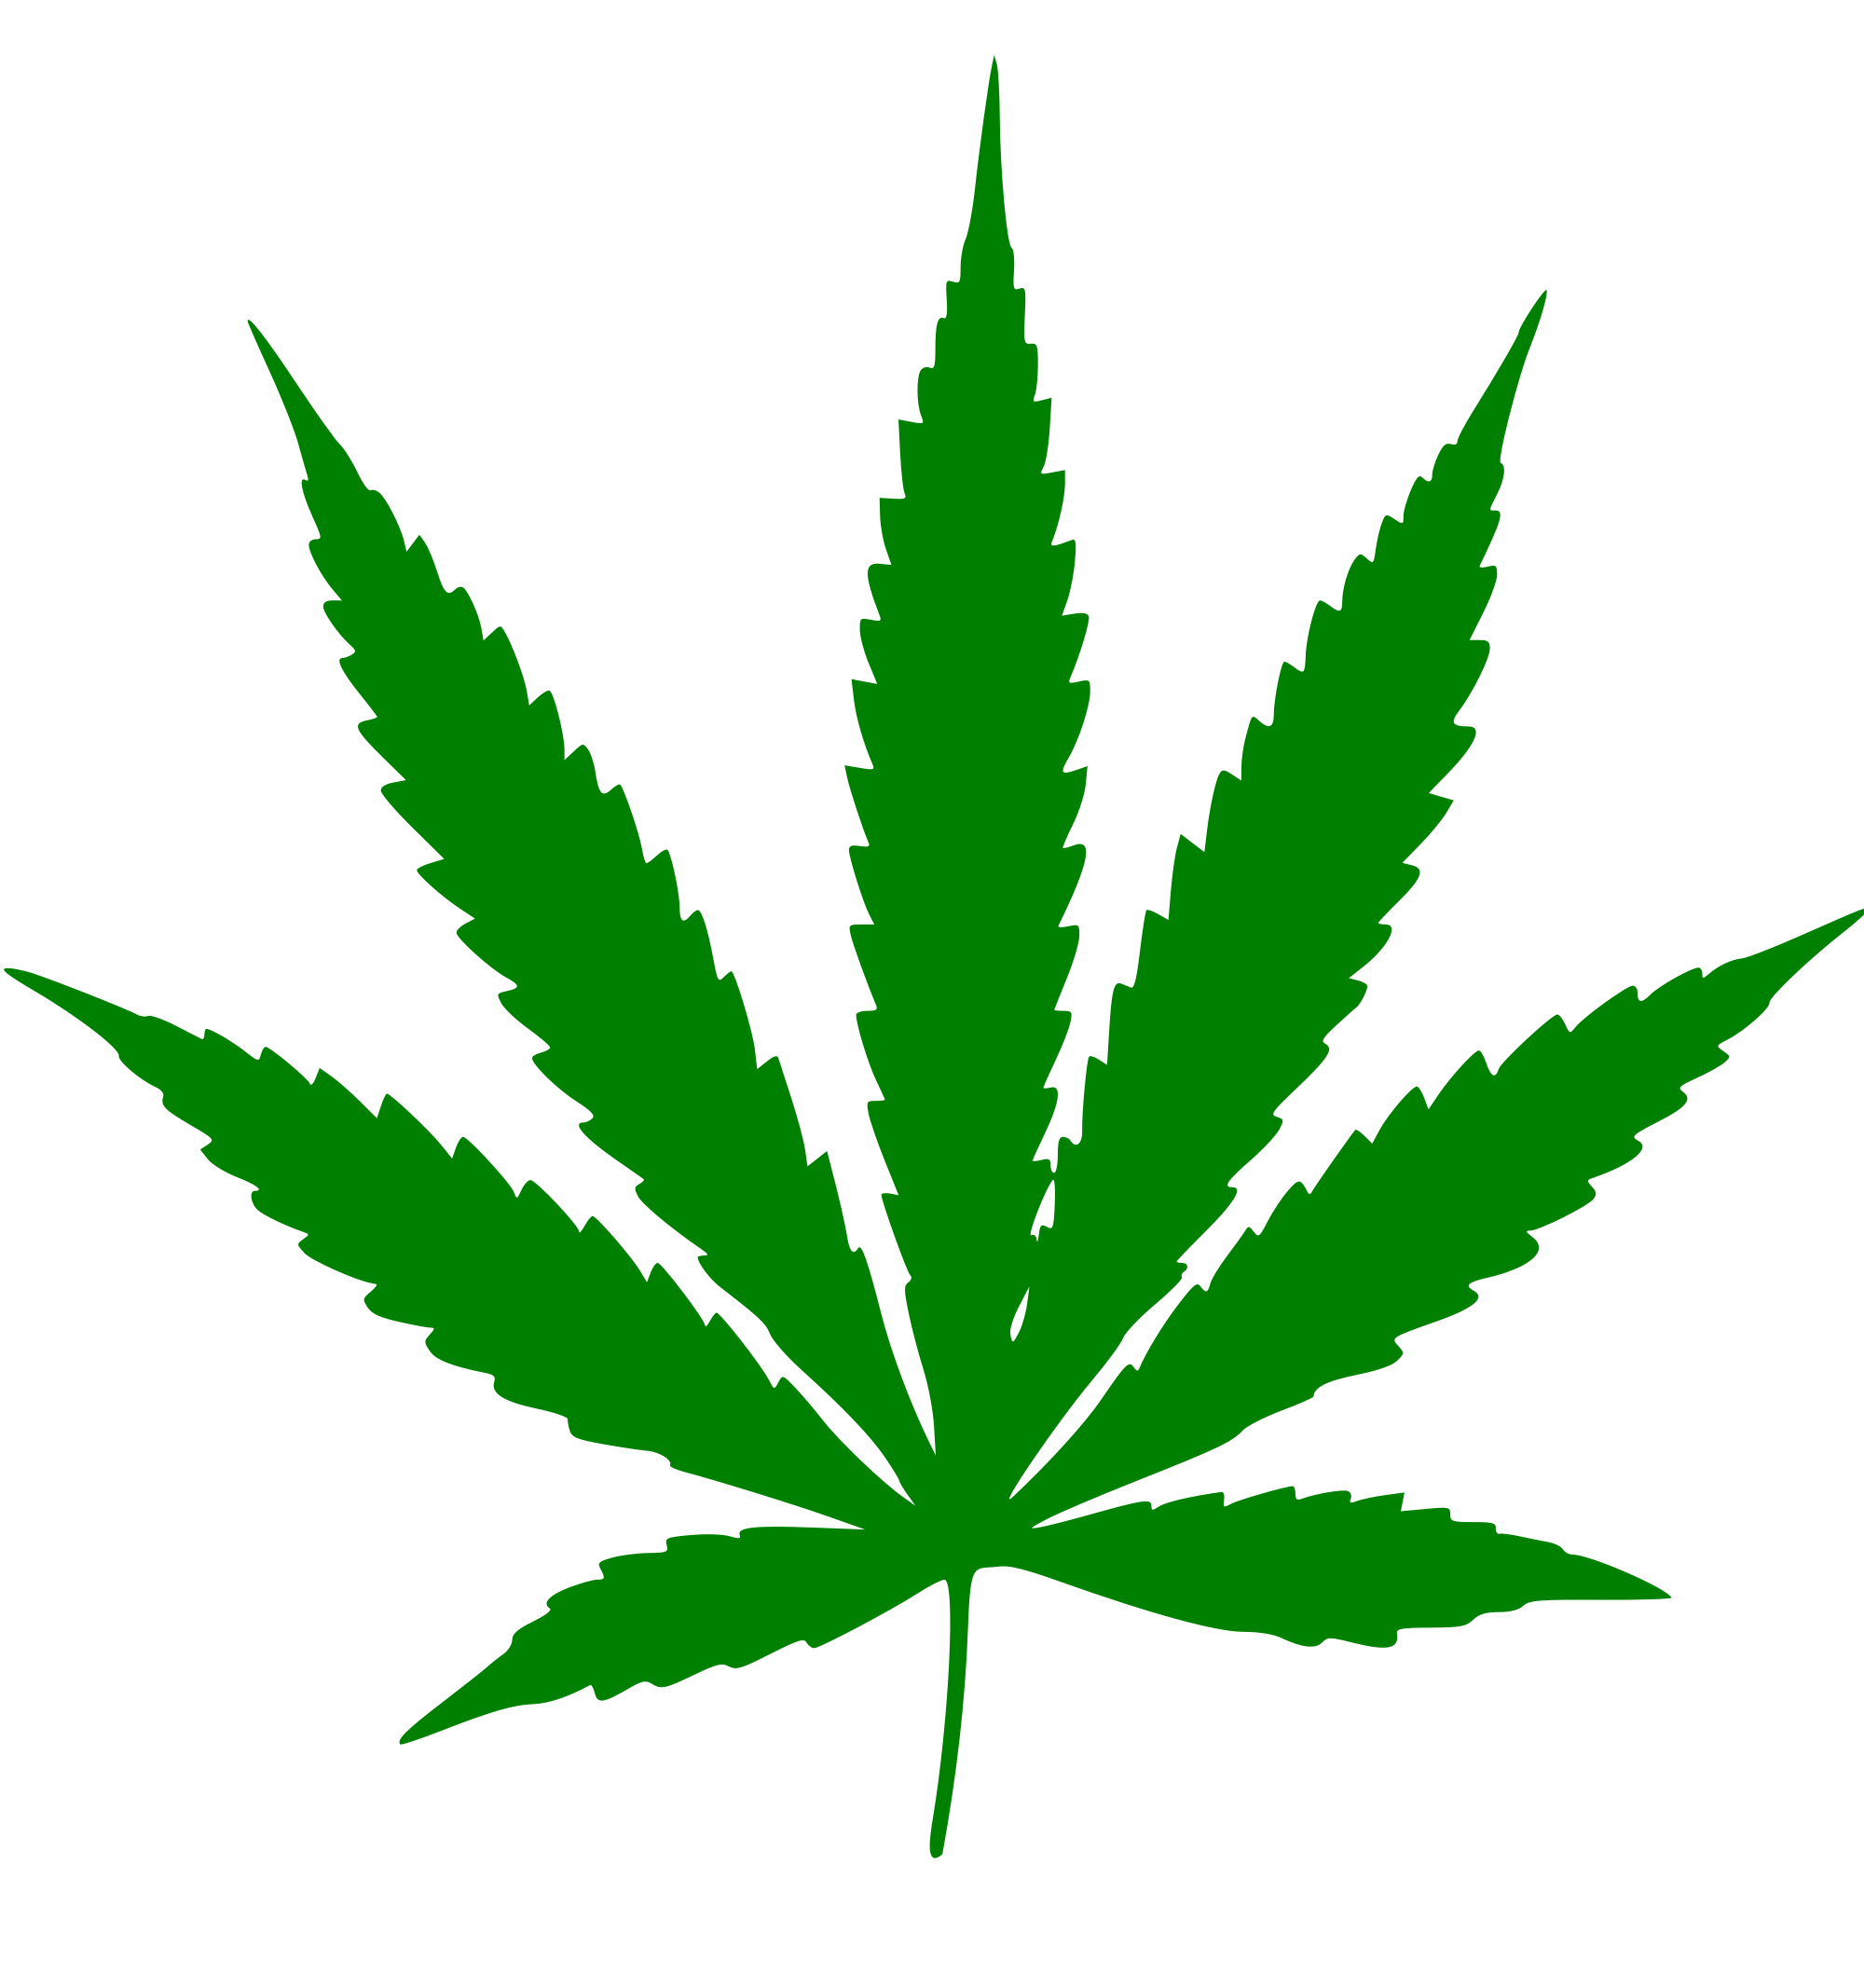 File:Cannabis leaf.svg - Wikimedia Commons - ClipArt Best - ClipArt Best | Shrinky Dink Stencils | Pinterest | Hemp oil, Videos and This video